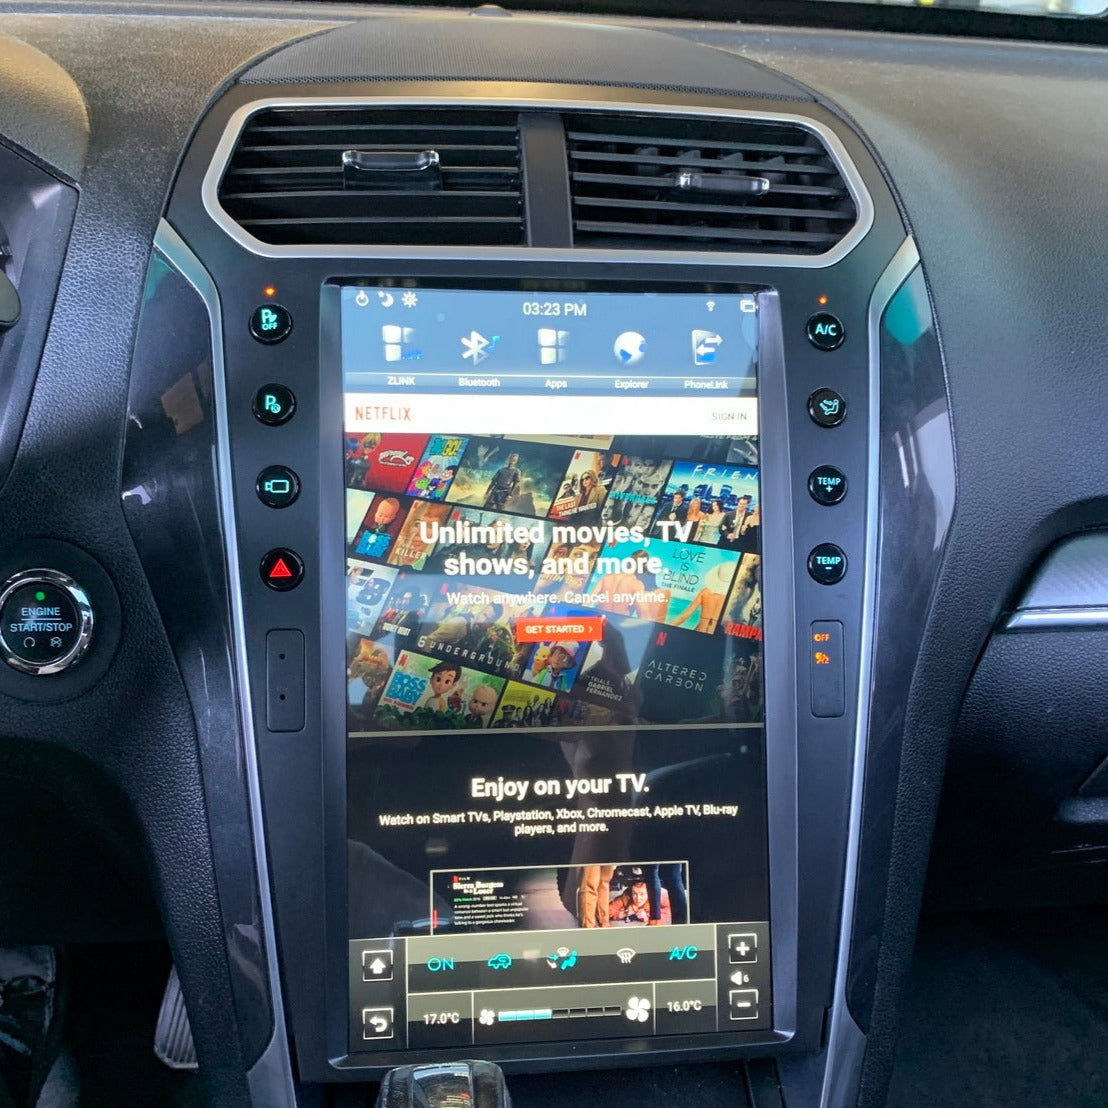 Tesla-style Carplay Screen for Ford Explorer